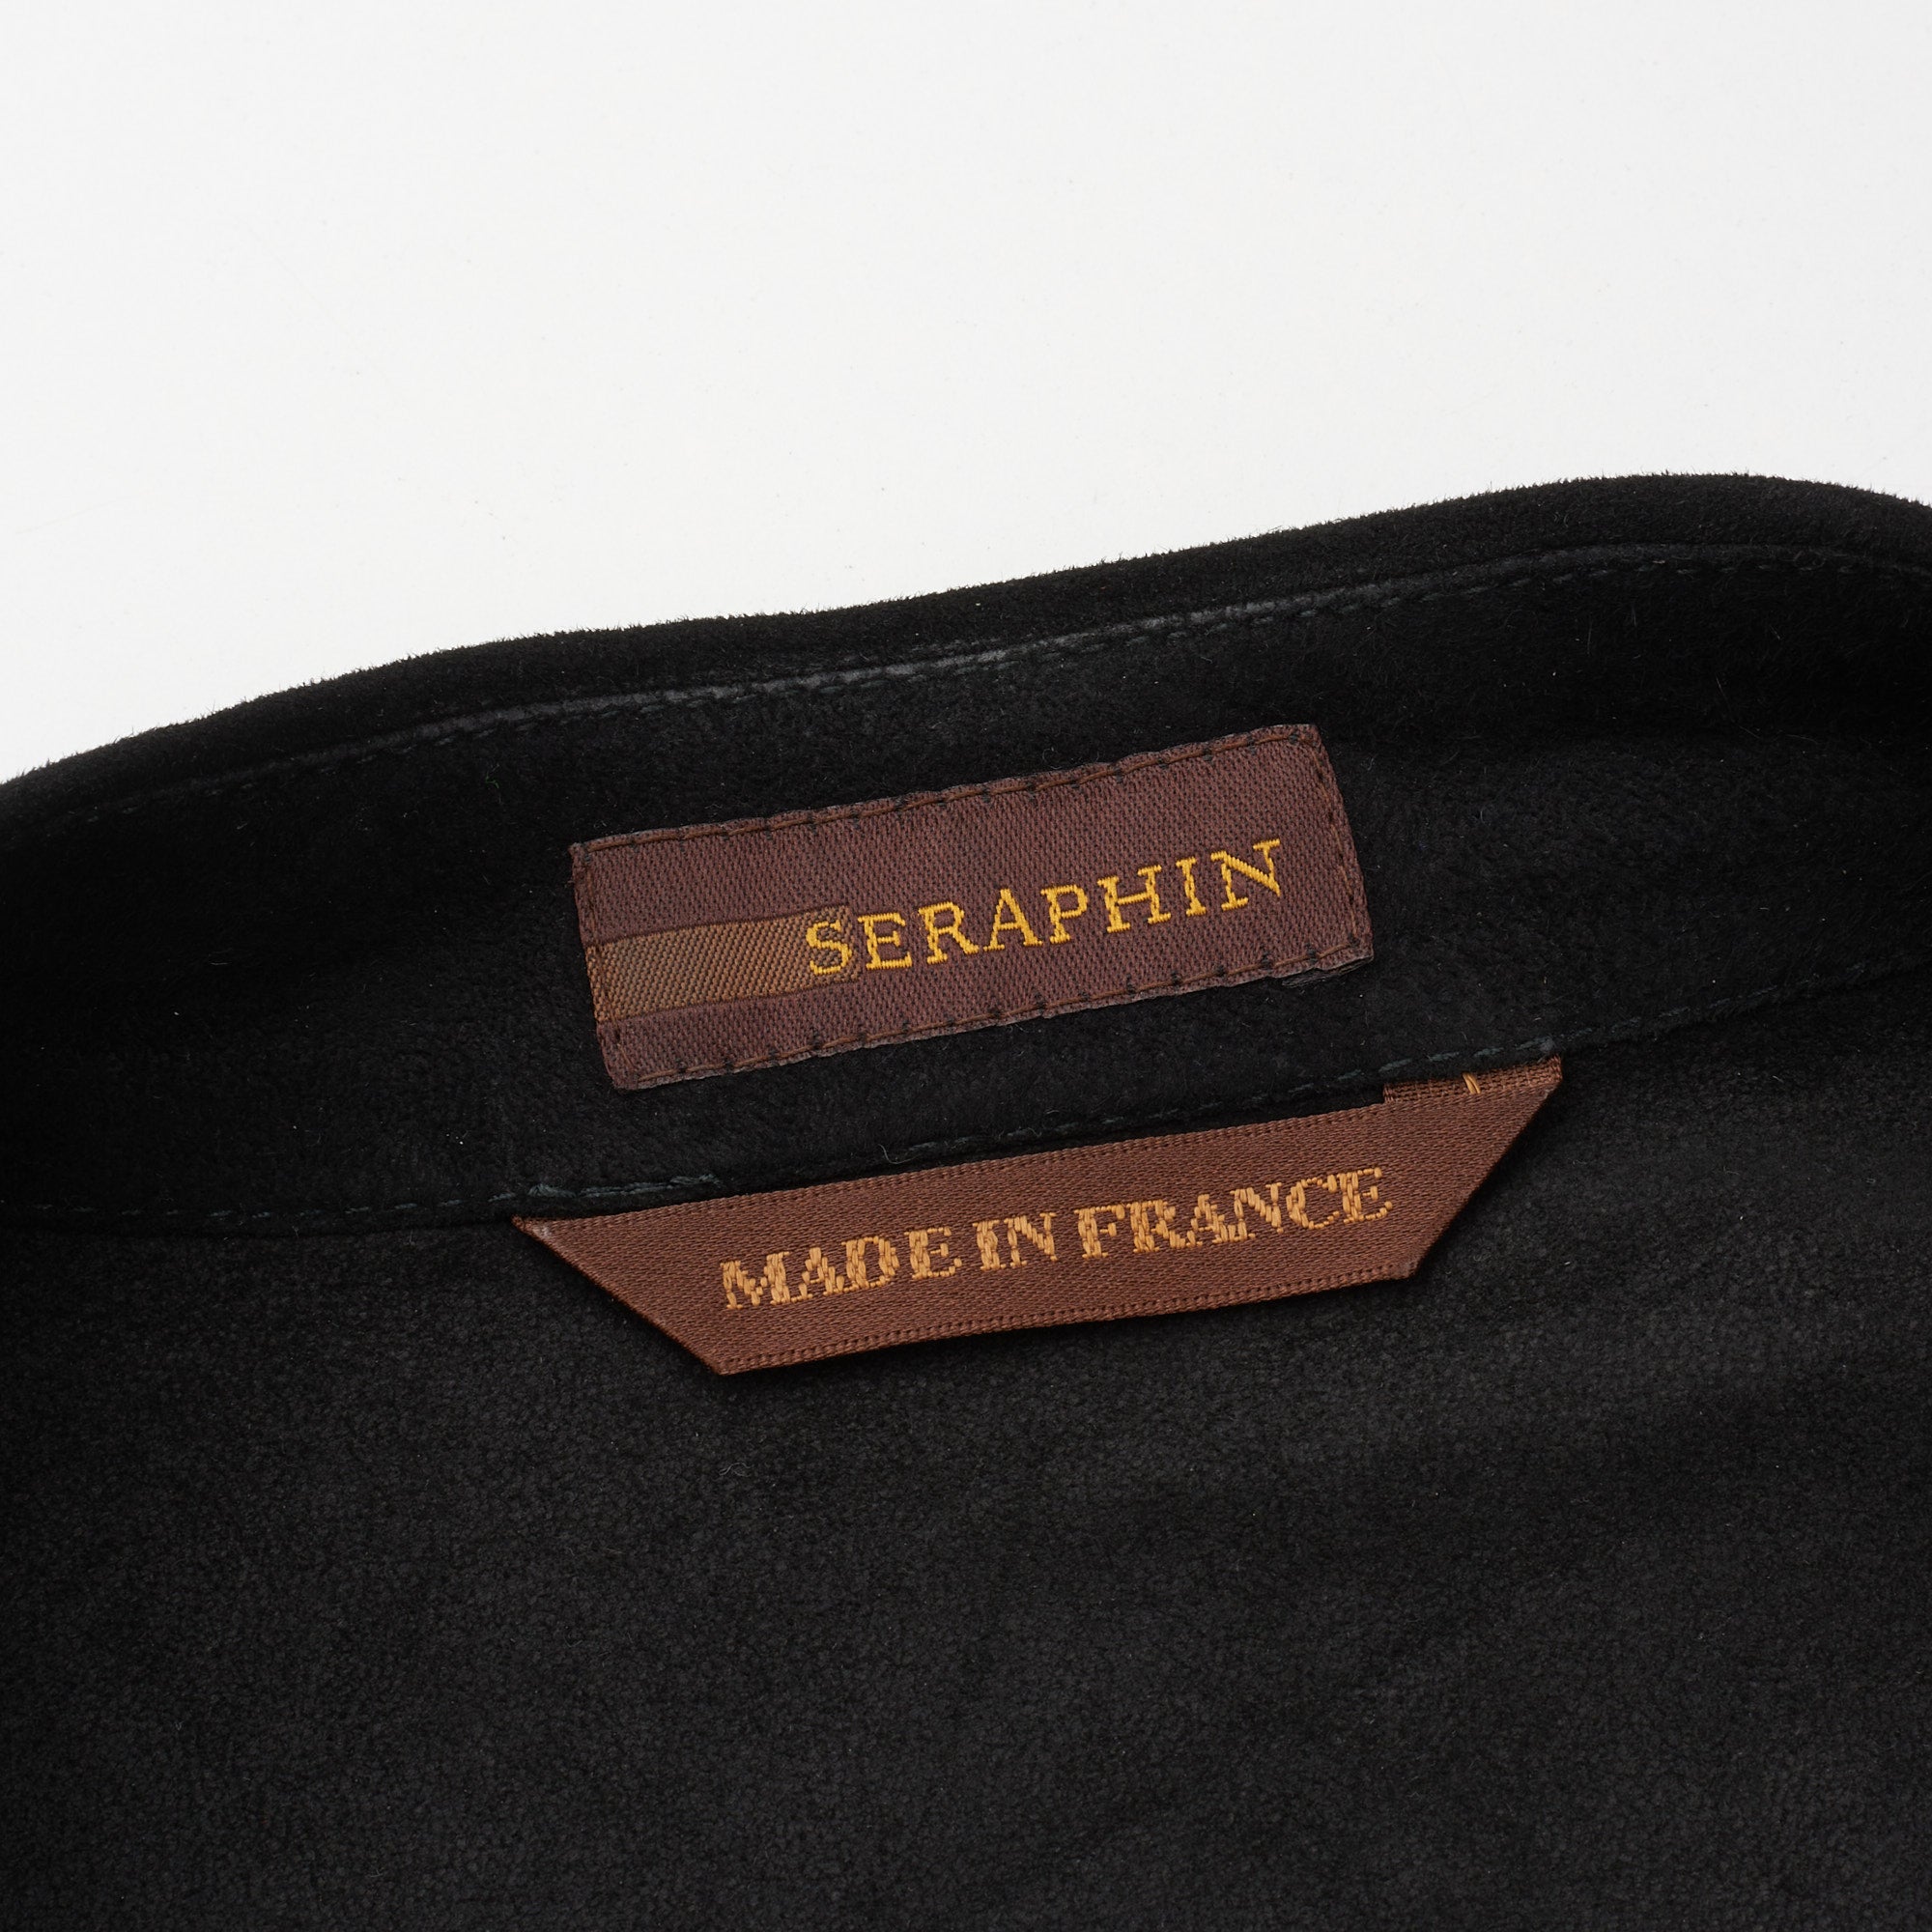 SERAPHIN Black Goat Suede Leather Shirt Jacket with Crocodile Pocket FR 50 US M NEW SERAPHIN